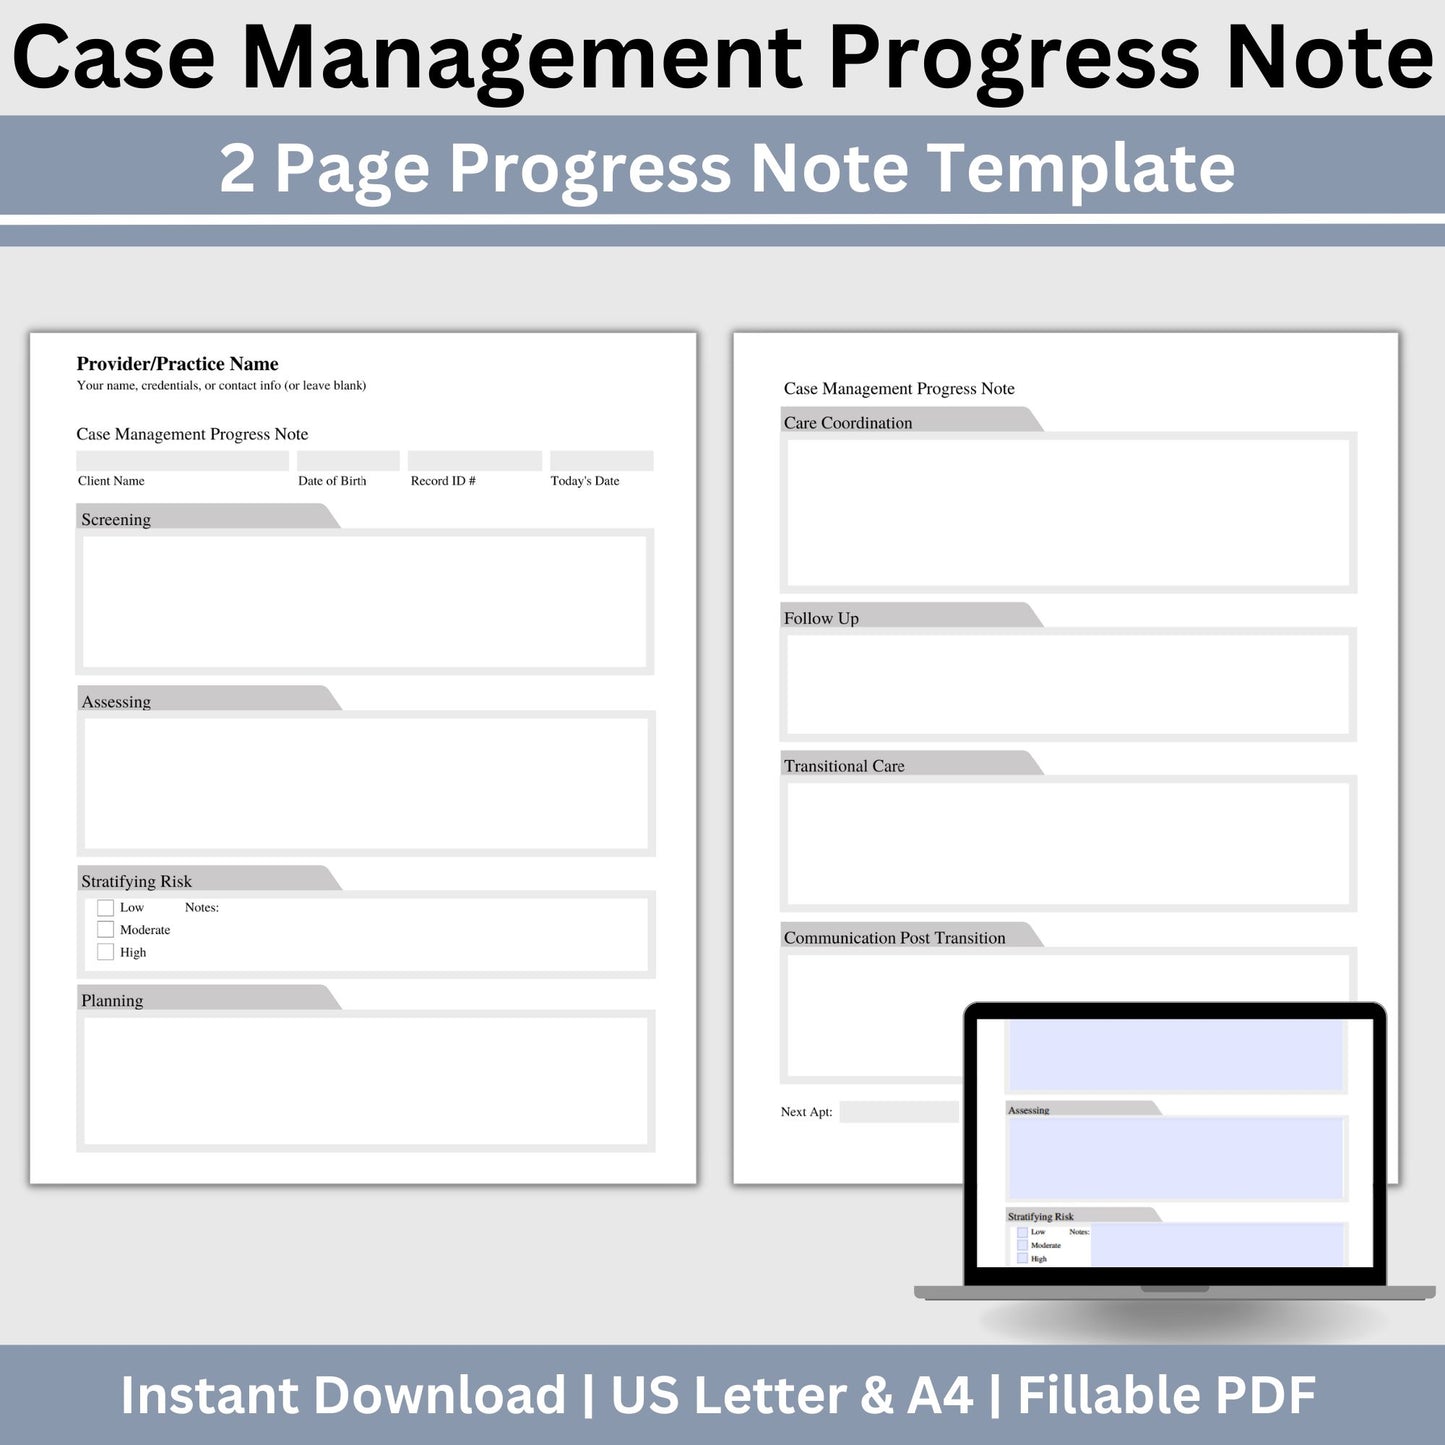 Case Management Template for Progress Notes. Tailored for case managers, school counselors, and social workers, this user-friendly template streamlines the process of recording progress notes effortlessly.